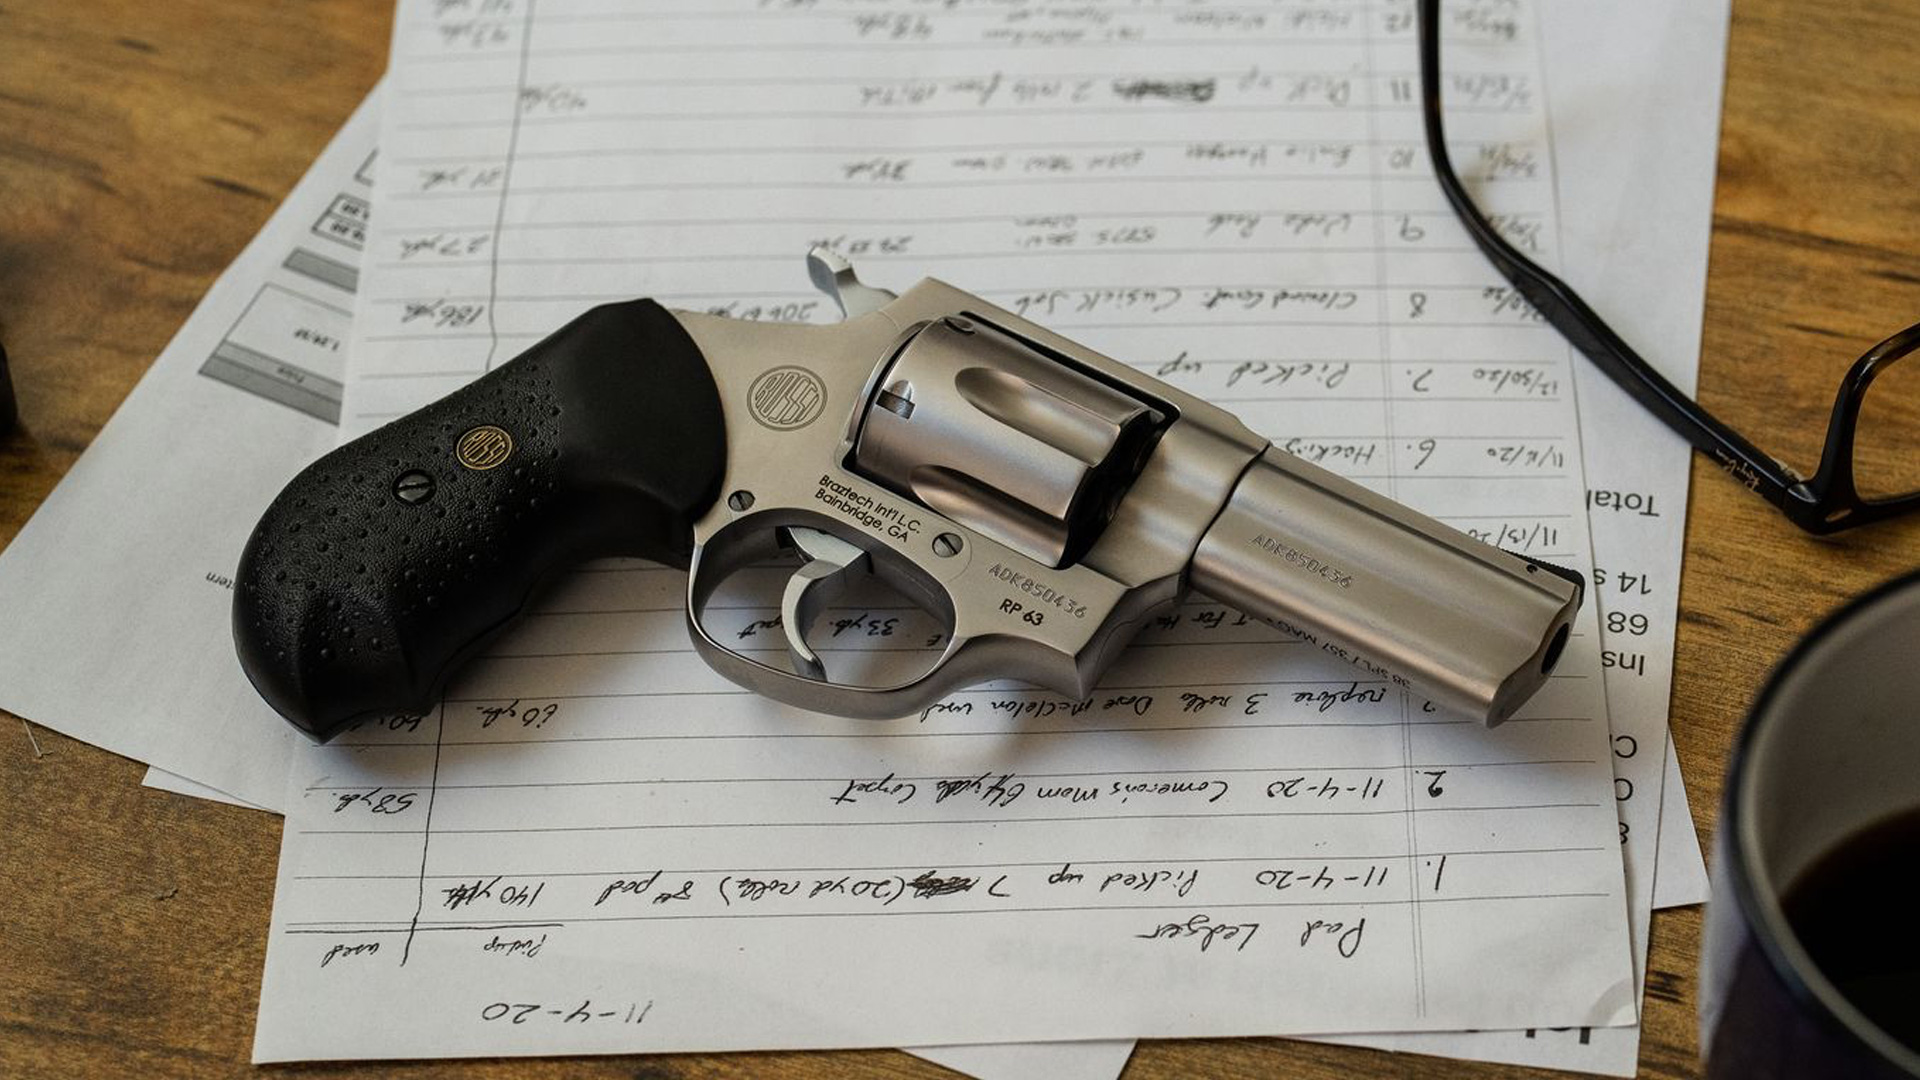 Rossi RP63 revolver on table